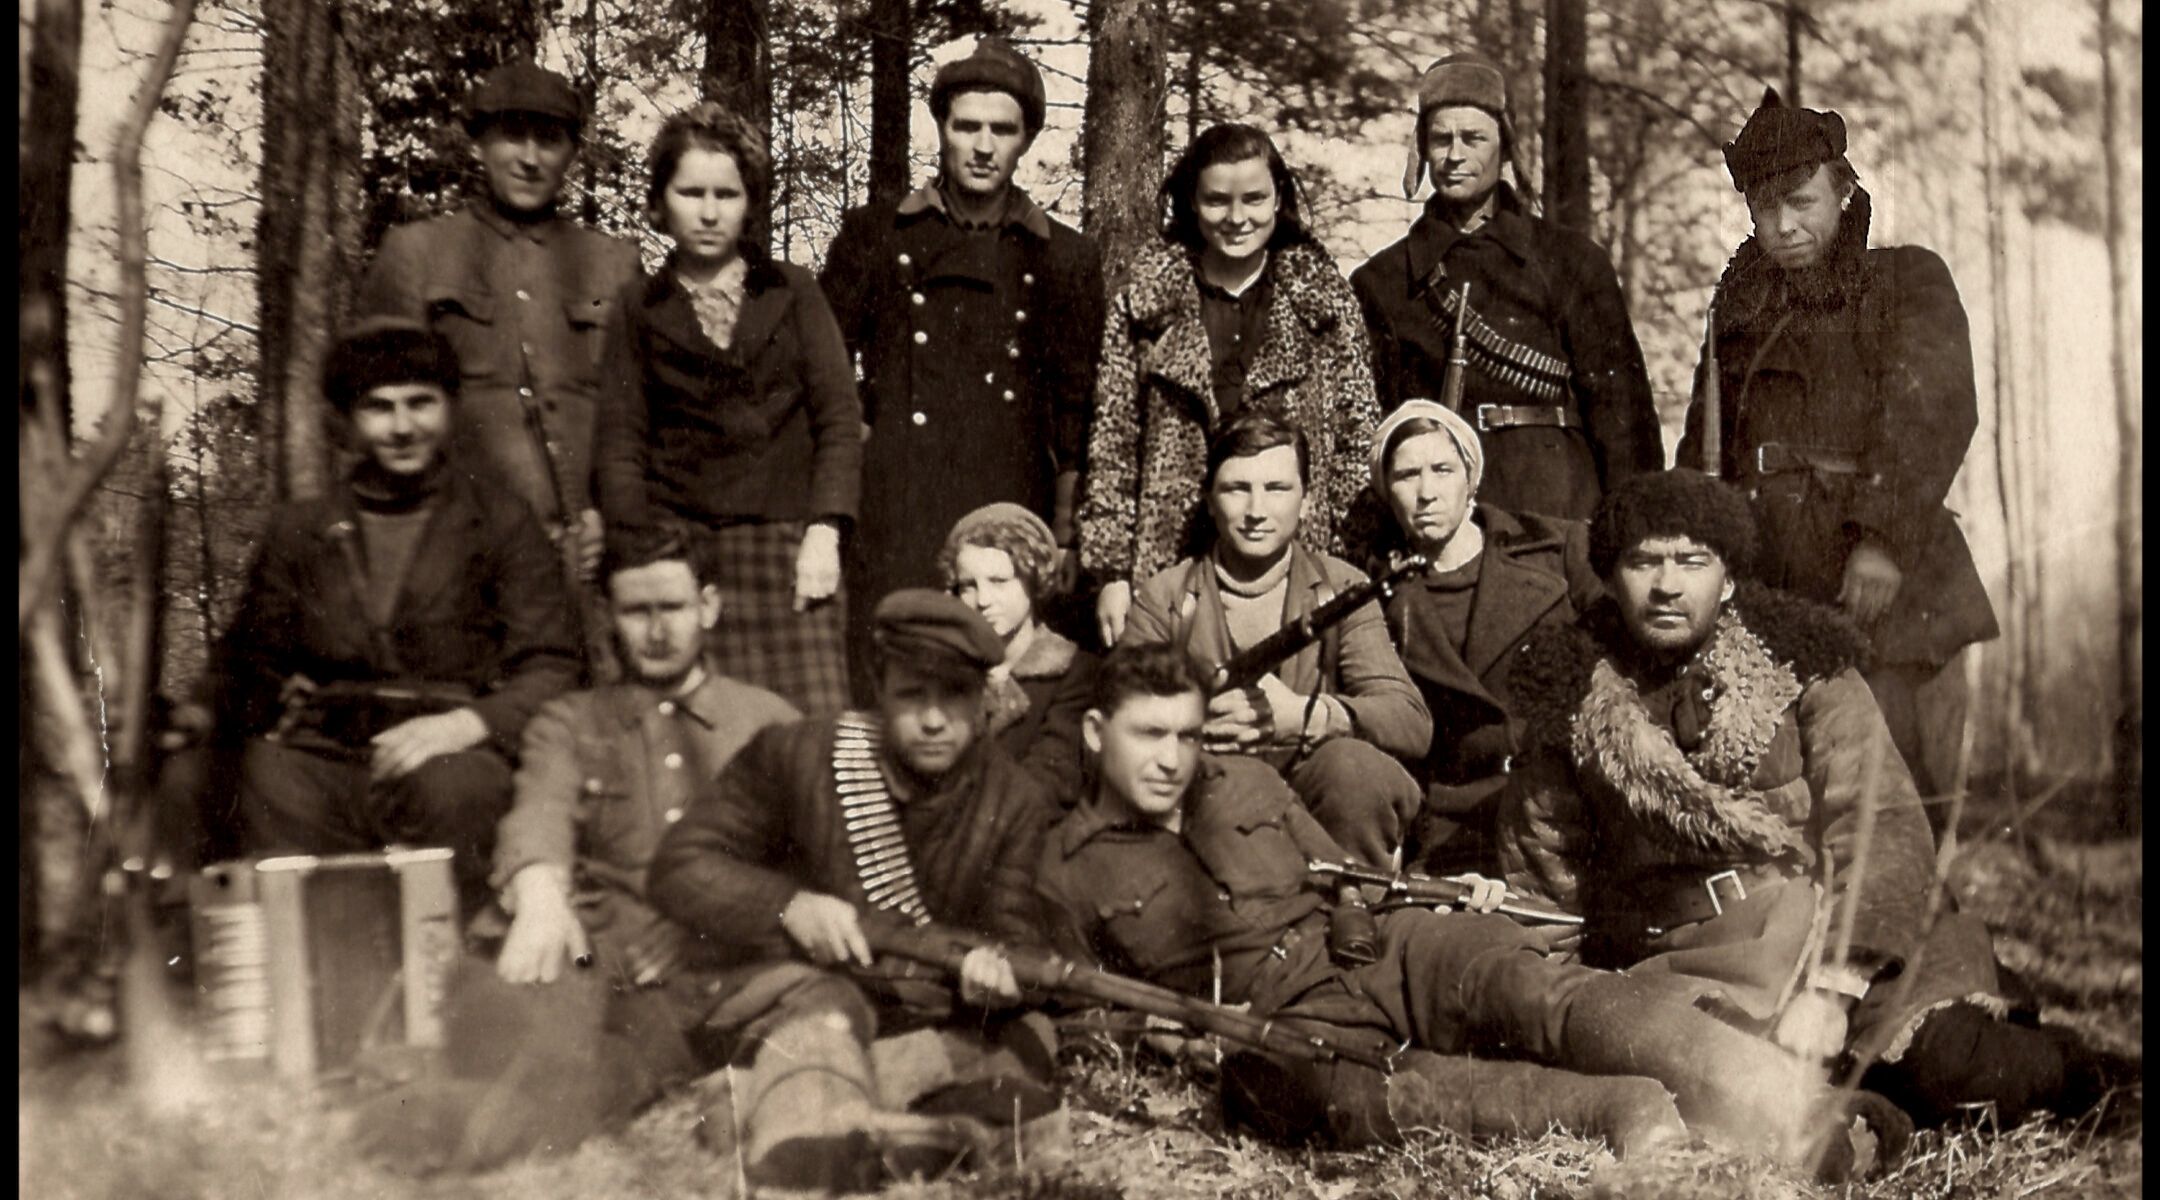 Armed fighters posing in the woods in a historical photo